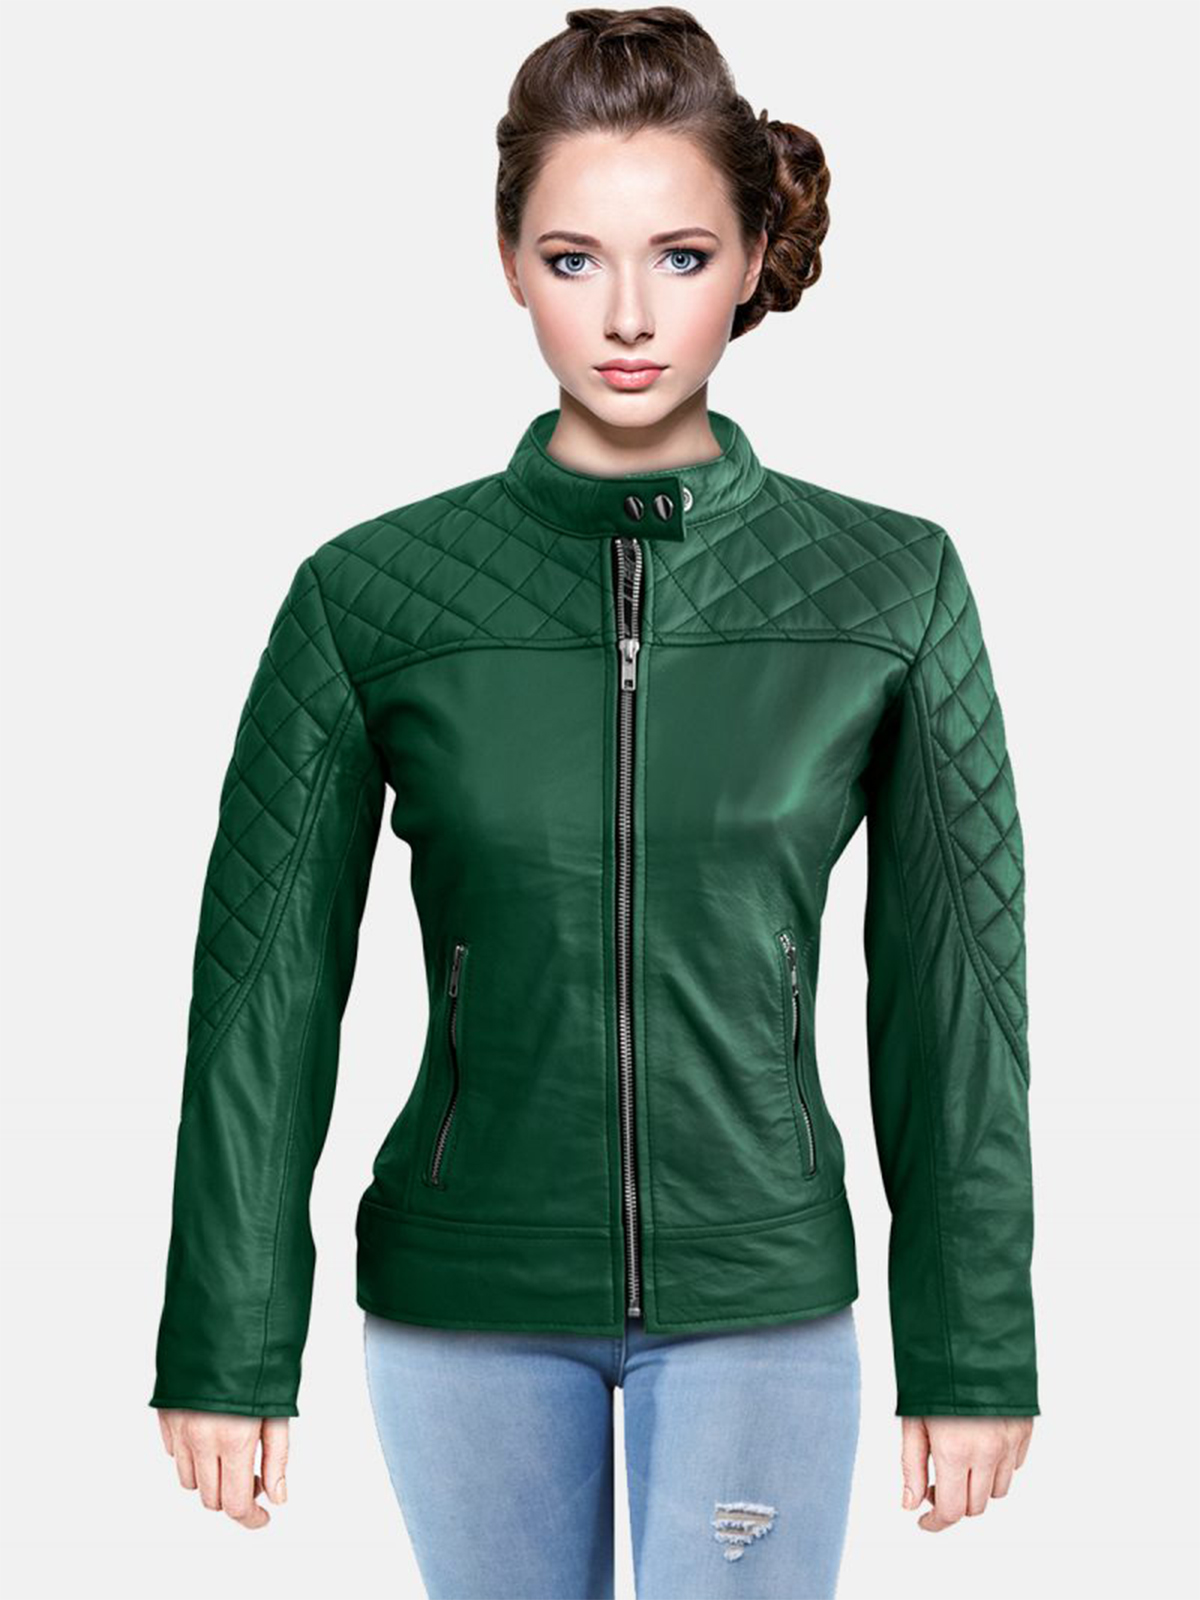 Women Green Quilted Genuine Leather Jacket - Stars Jackets